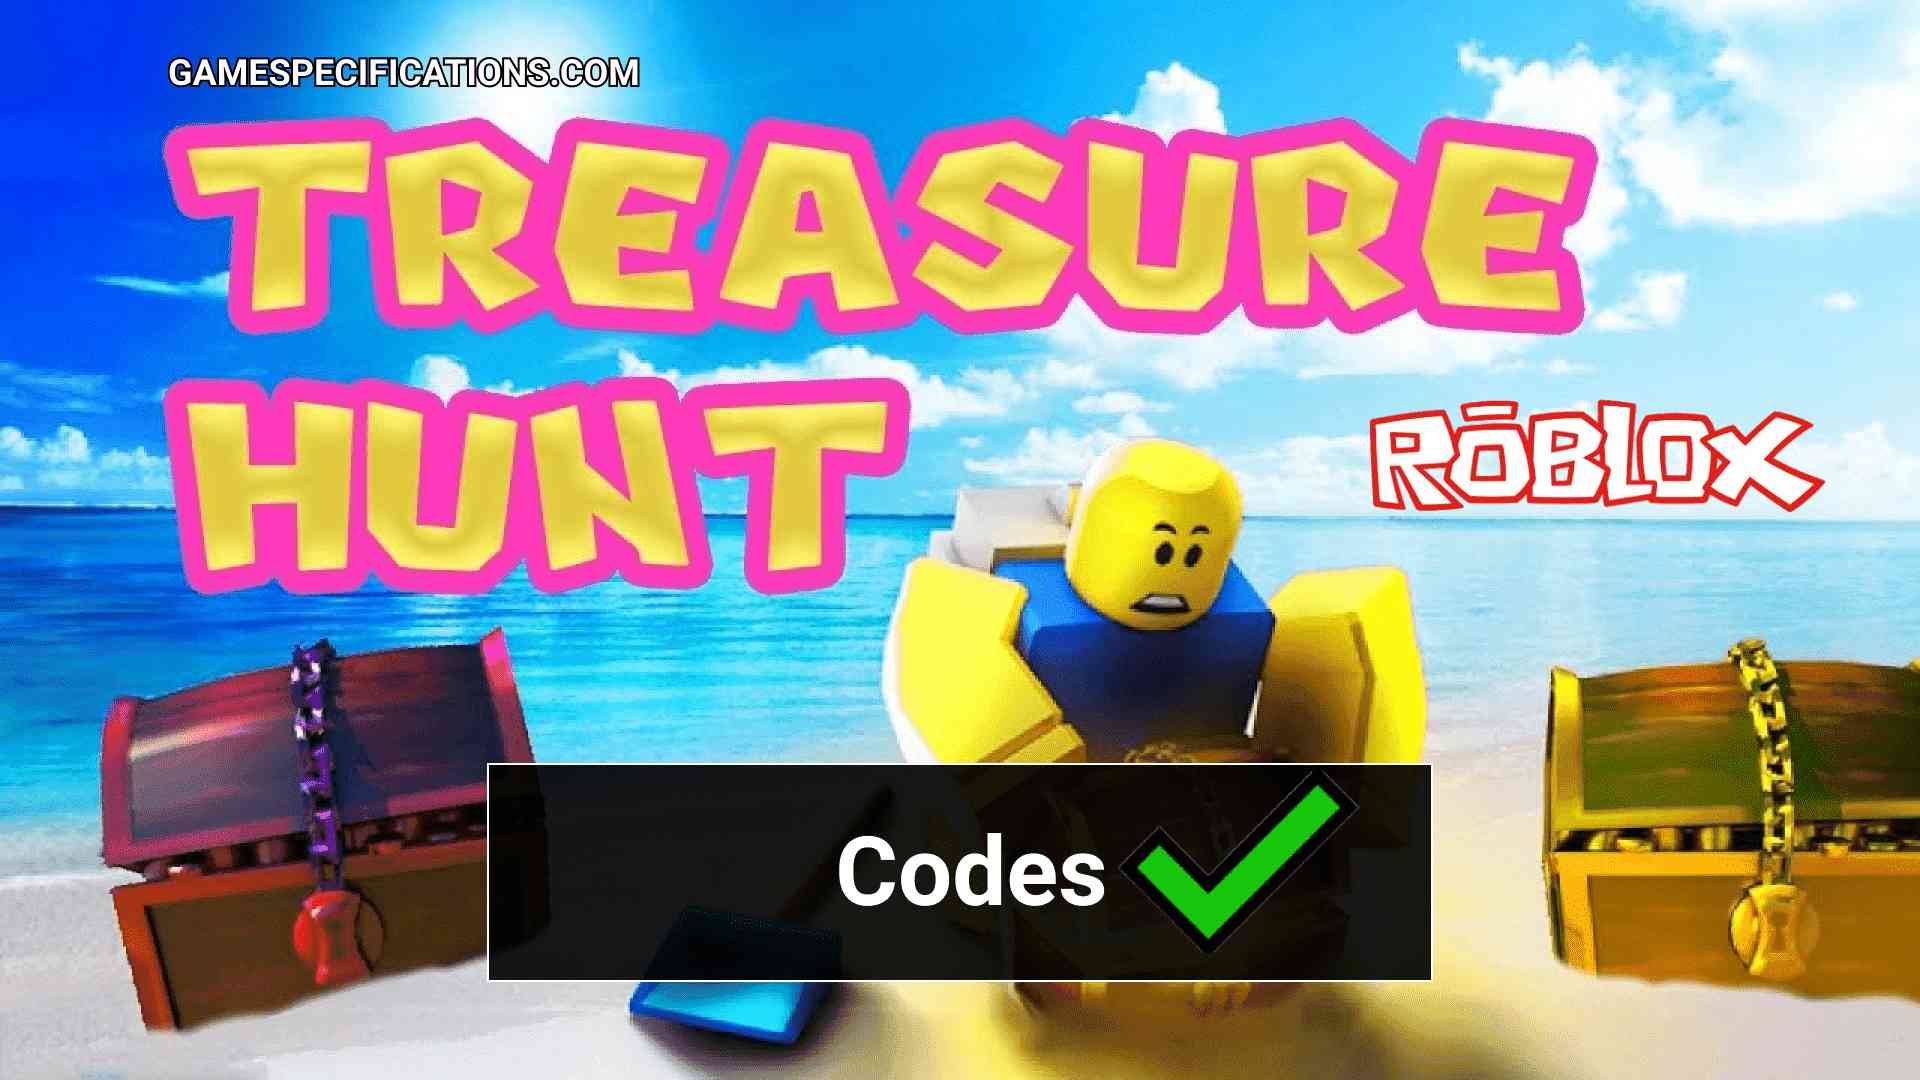 Roblox Treasure Hunt Simulator Codes July 2022 Game Specifications